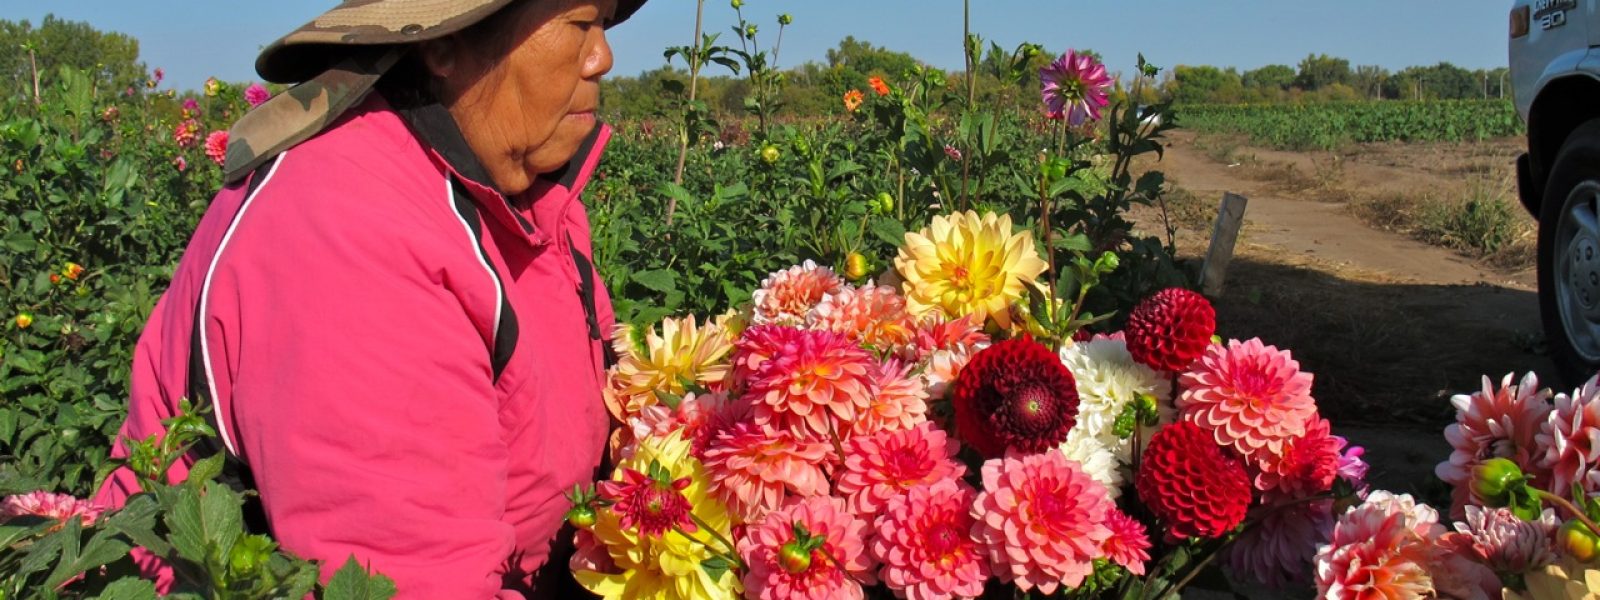 a person carrying a large pot of flowers